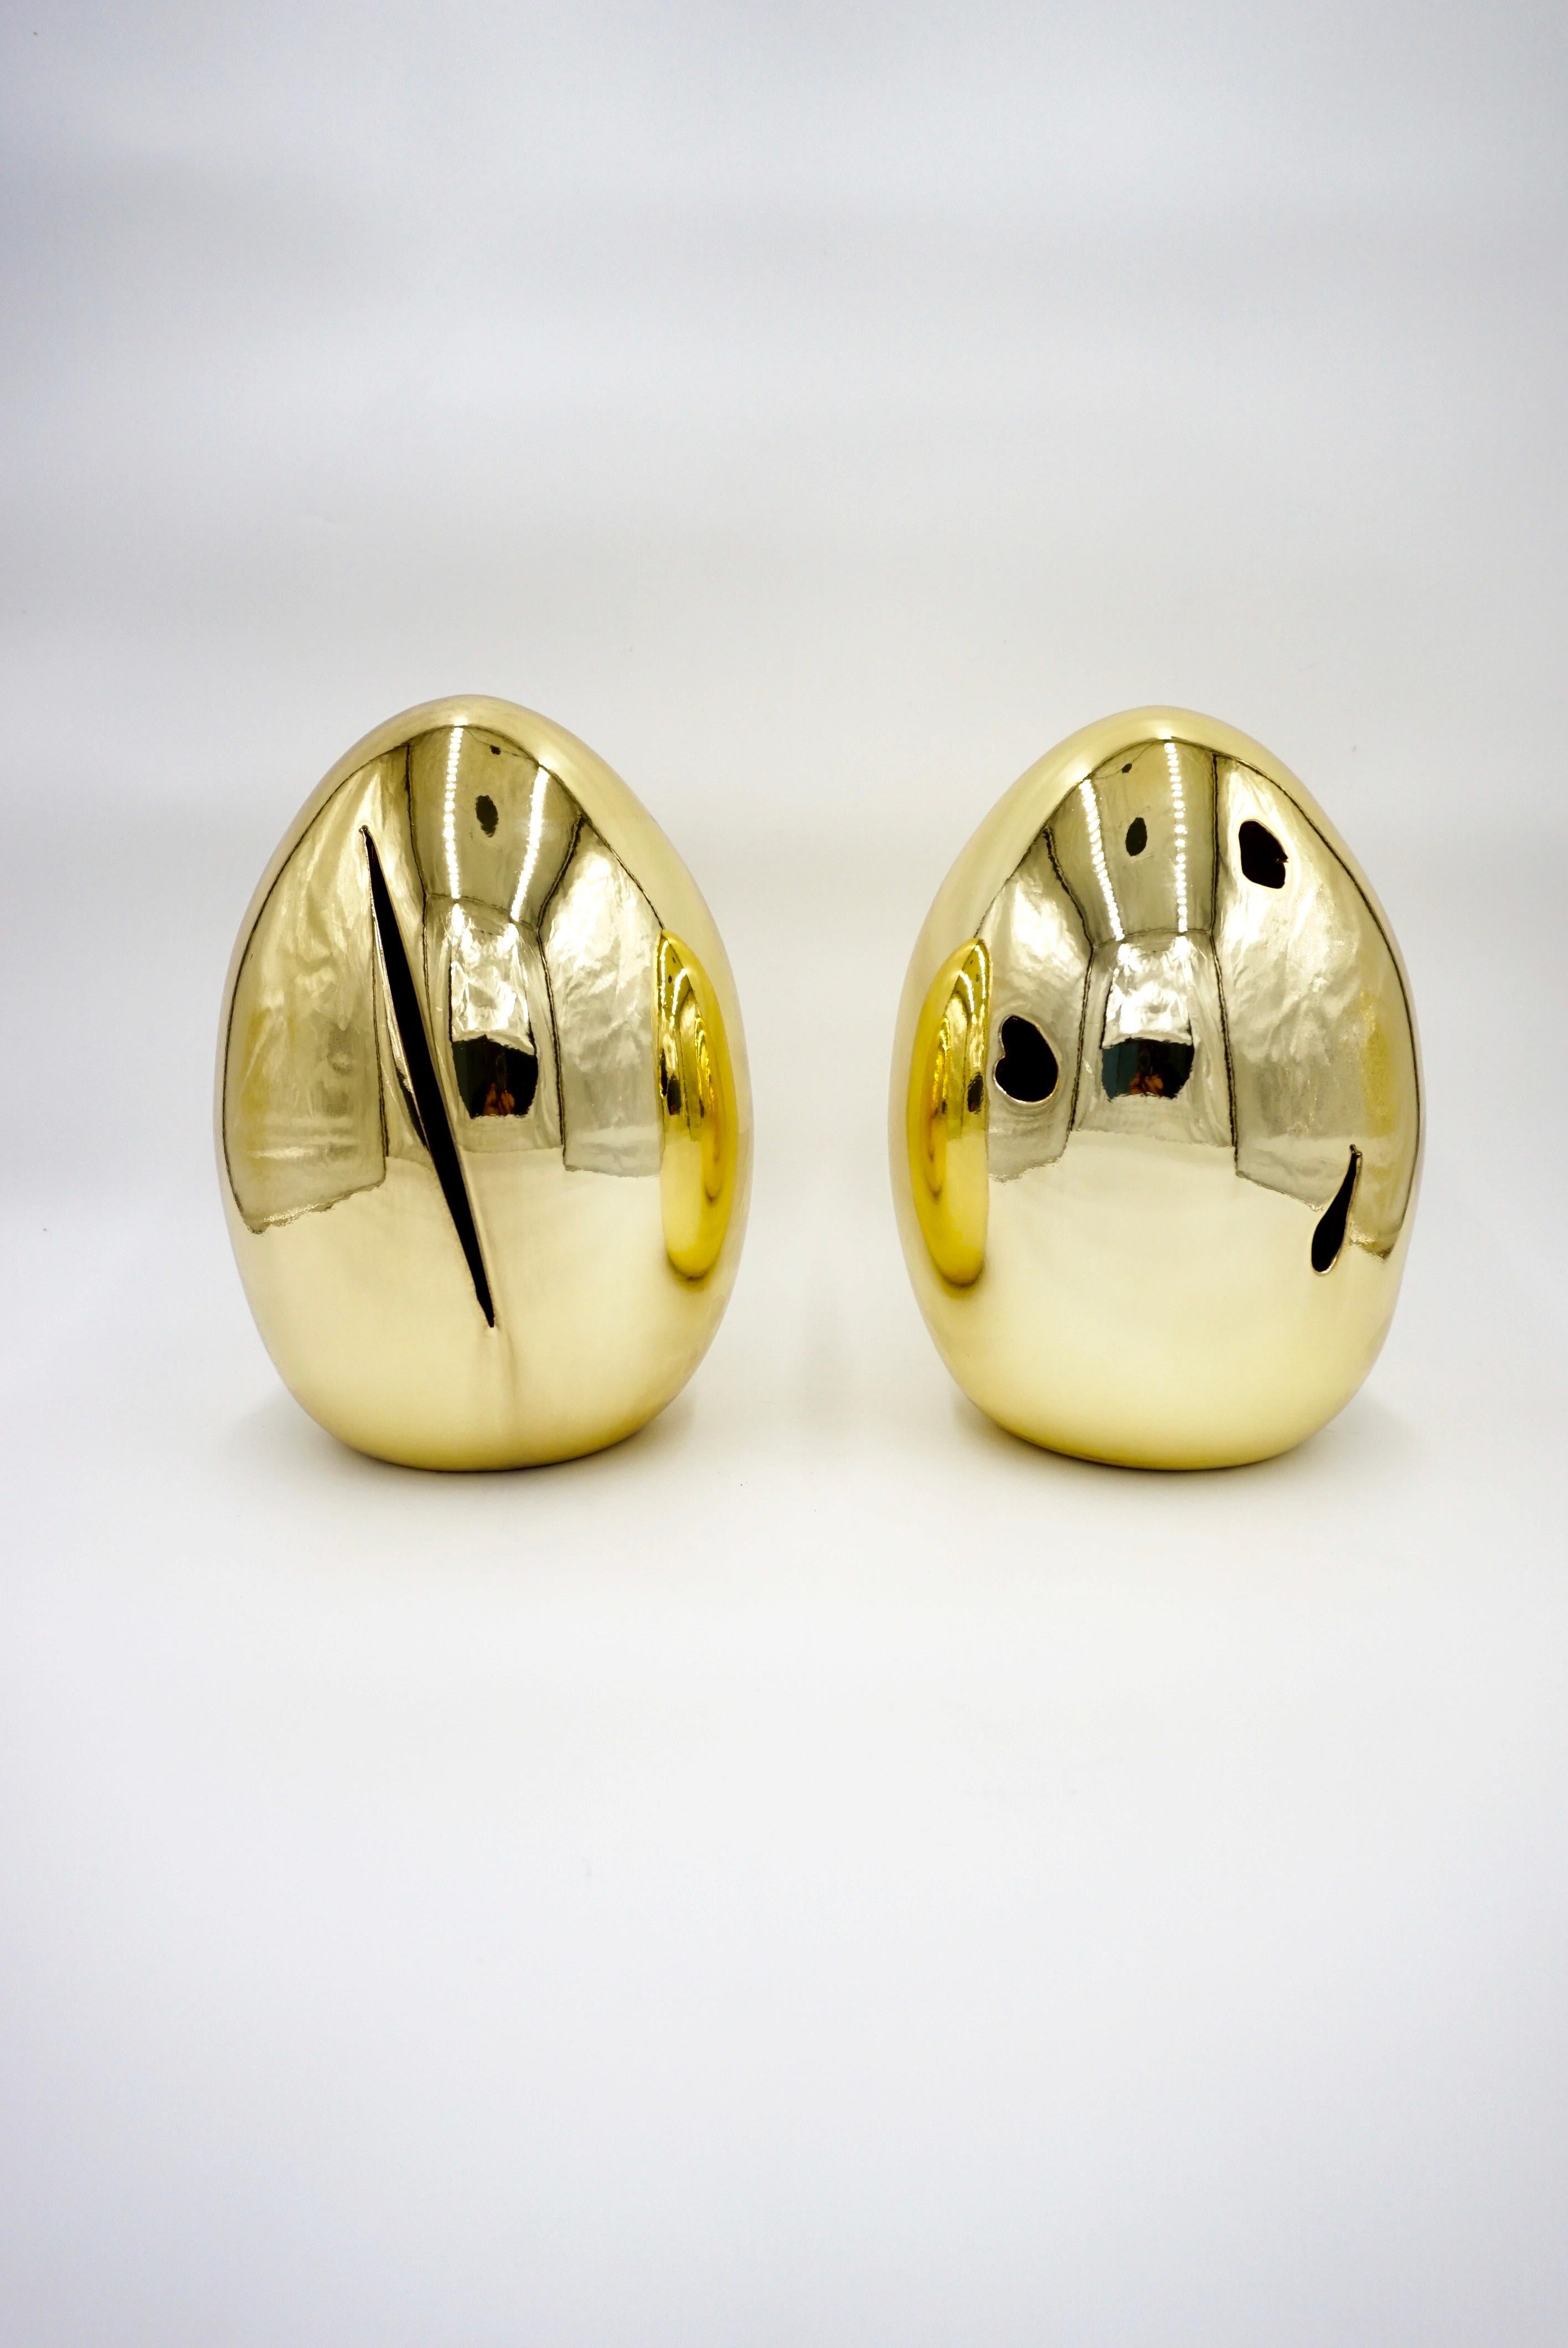 Pair of golden glazed polished ceramic table lamps, GOLDEN EGGS, by Lorenzo Ciompi, limited edition, 2023.
A tribute to Lucio Fontana, inspired by the works of Lucio Fontana 